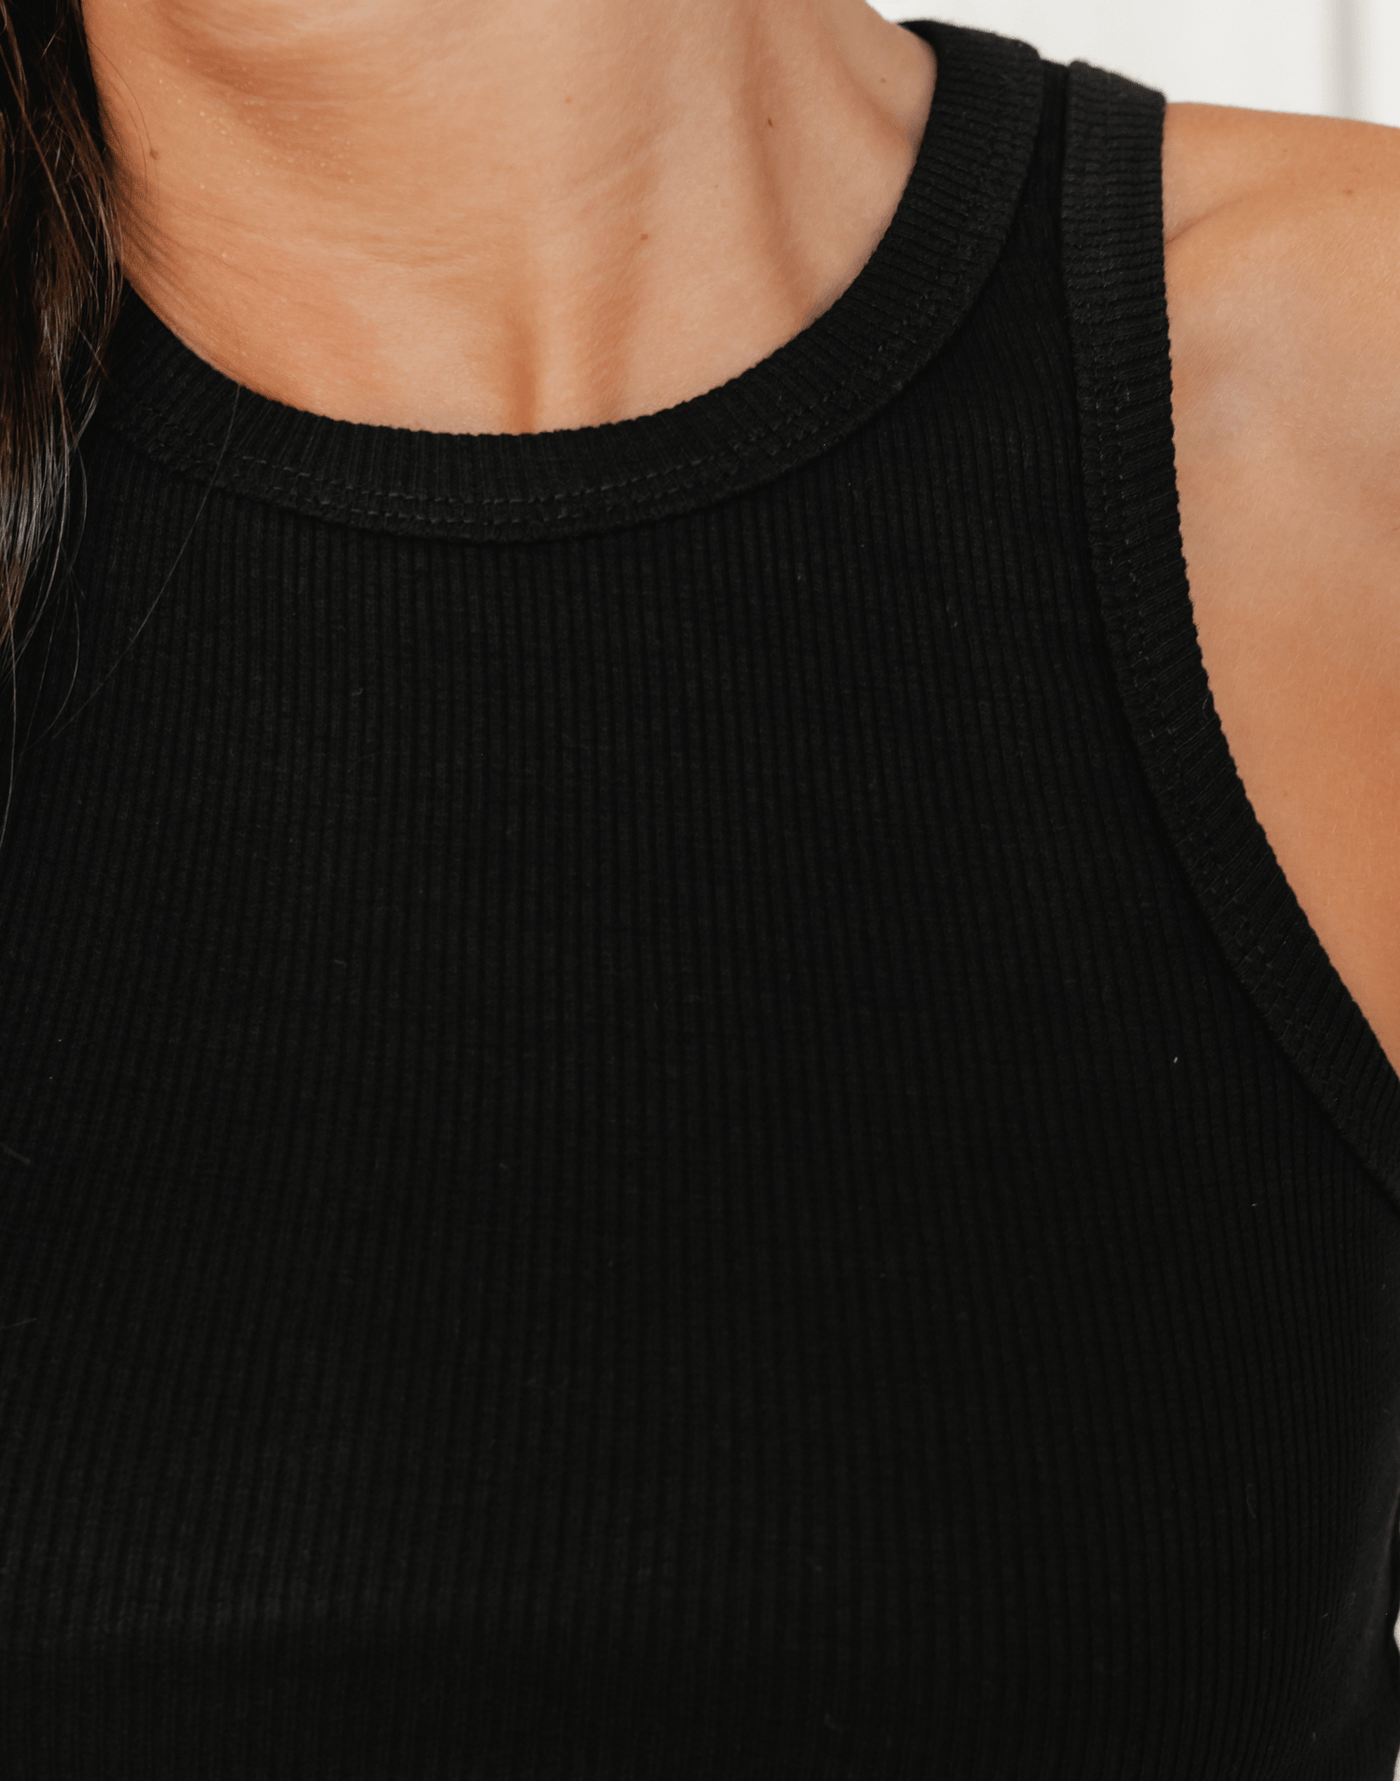 Emerie Tank Top (Black) - Ribbed Tank Top - Women's Top - Charcoal Clothing